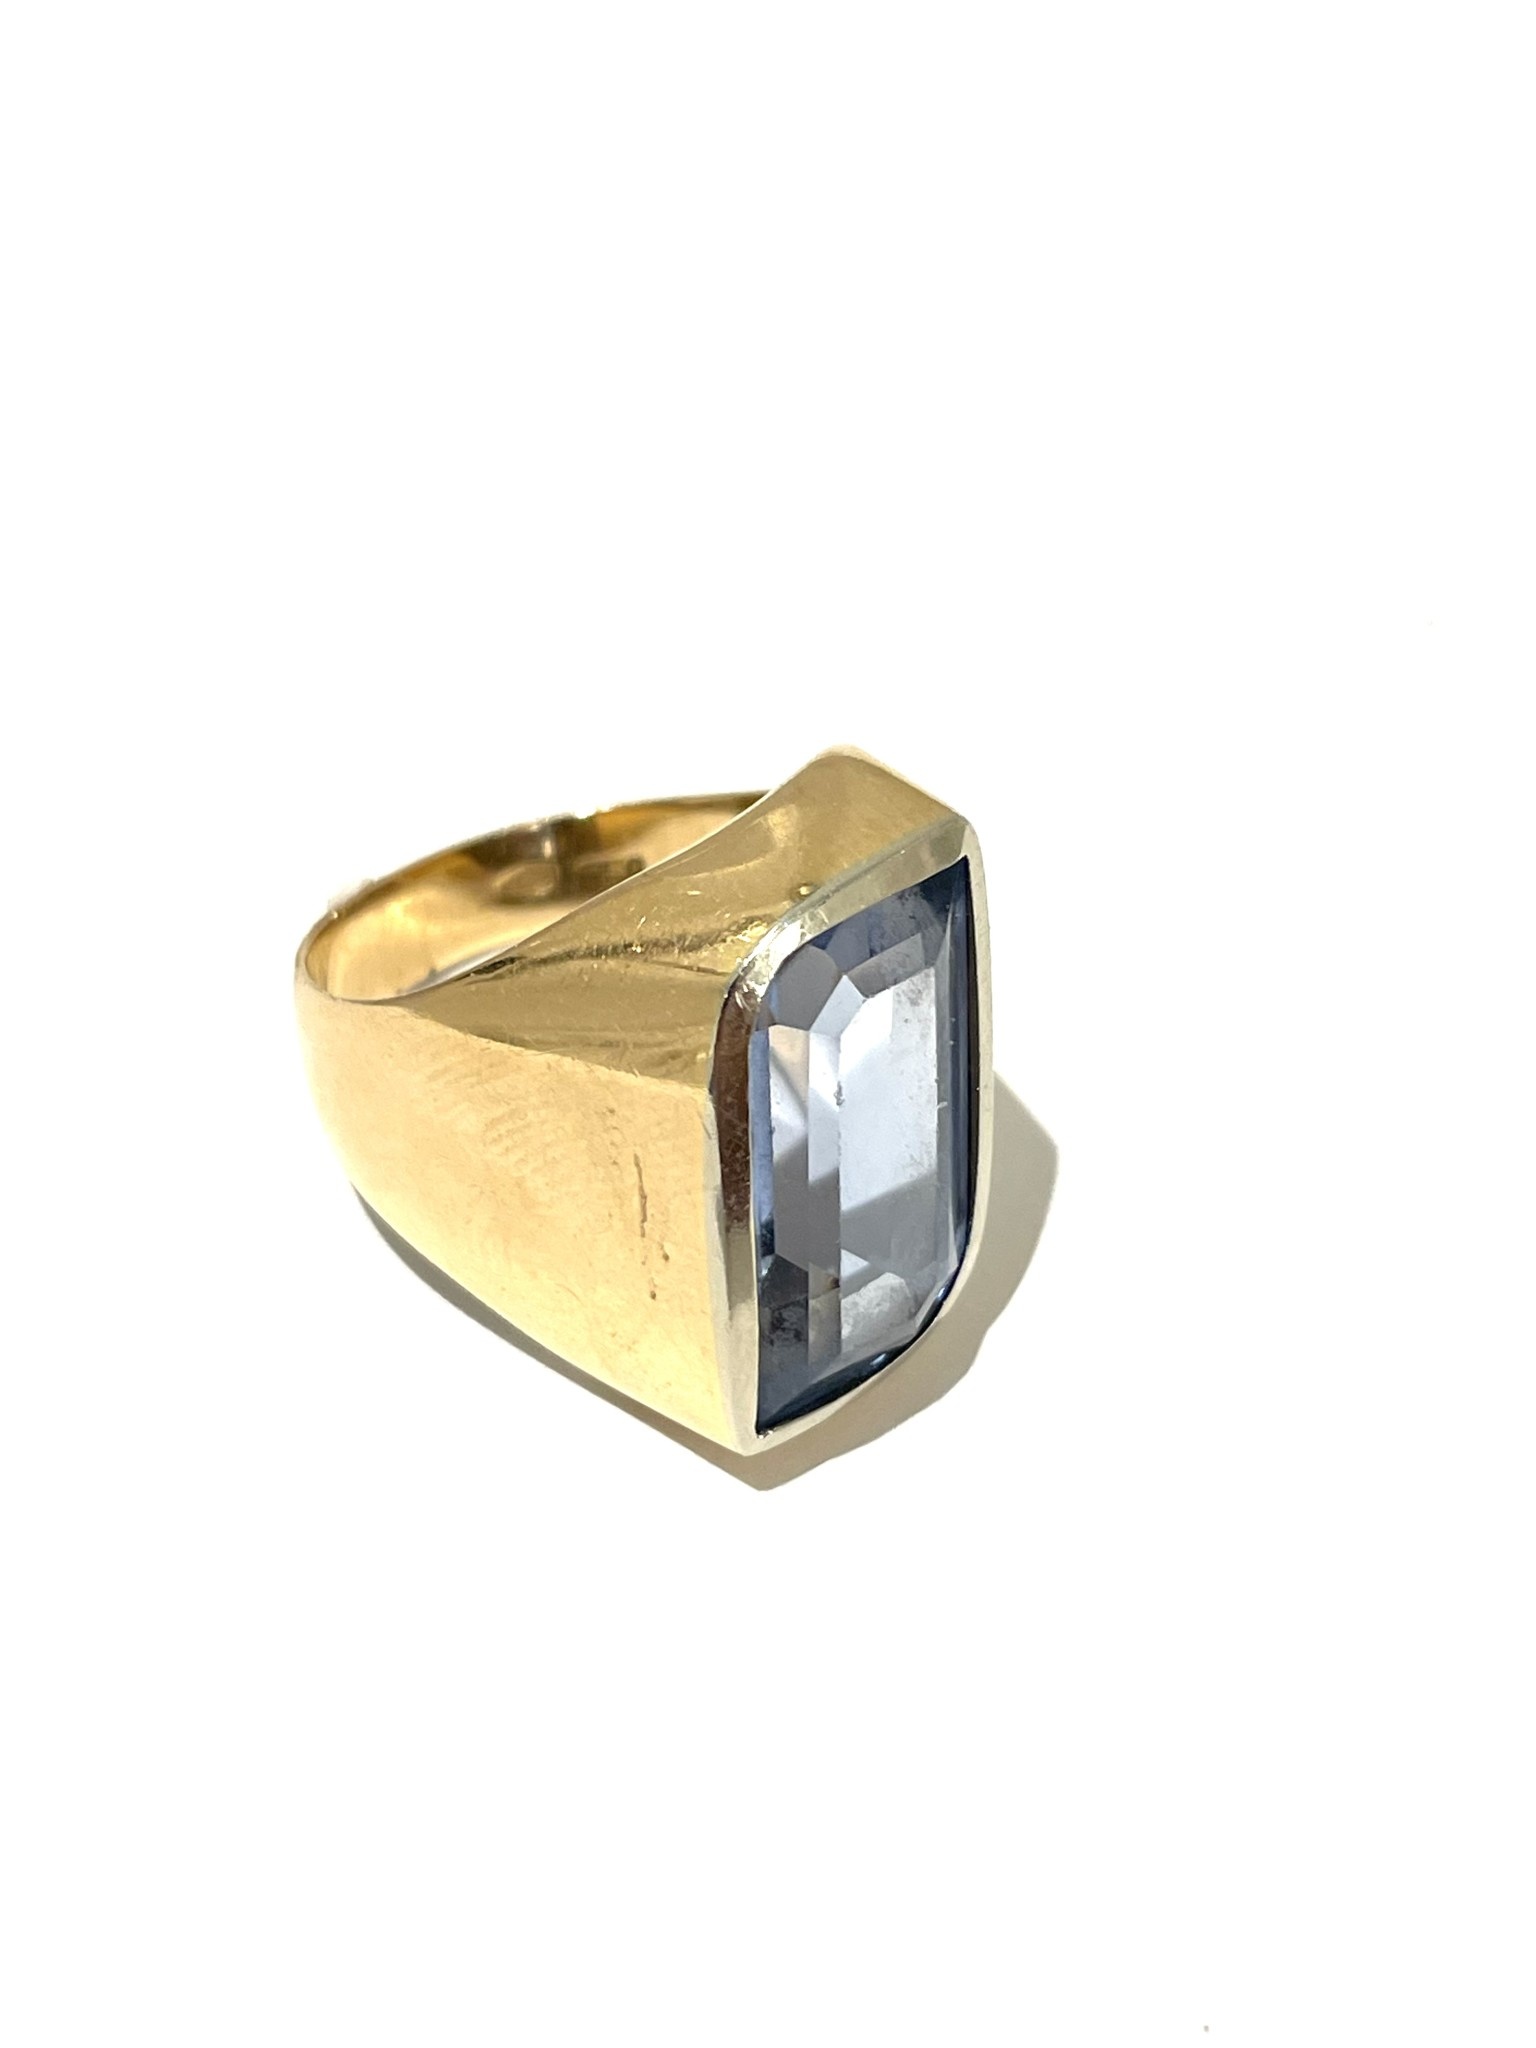 Vintage 18ct Yellow Gold and Synthetic Spinel Dress Ring c1970 8.1g. Size'N - Sourced USA-2